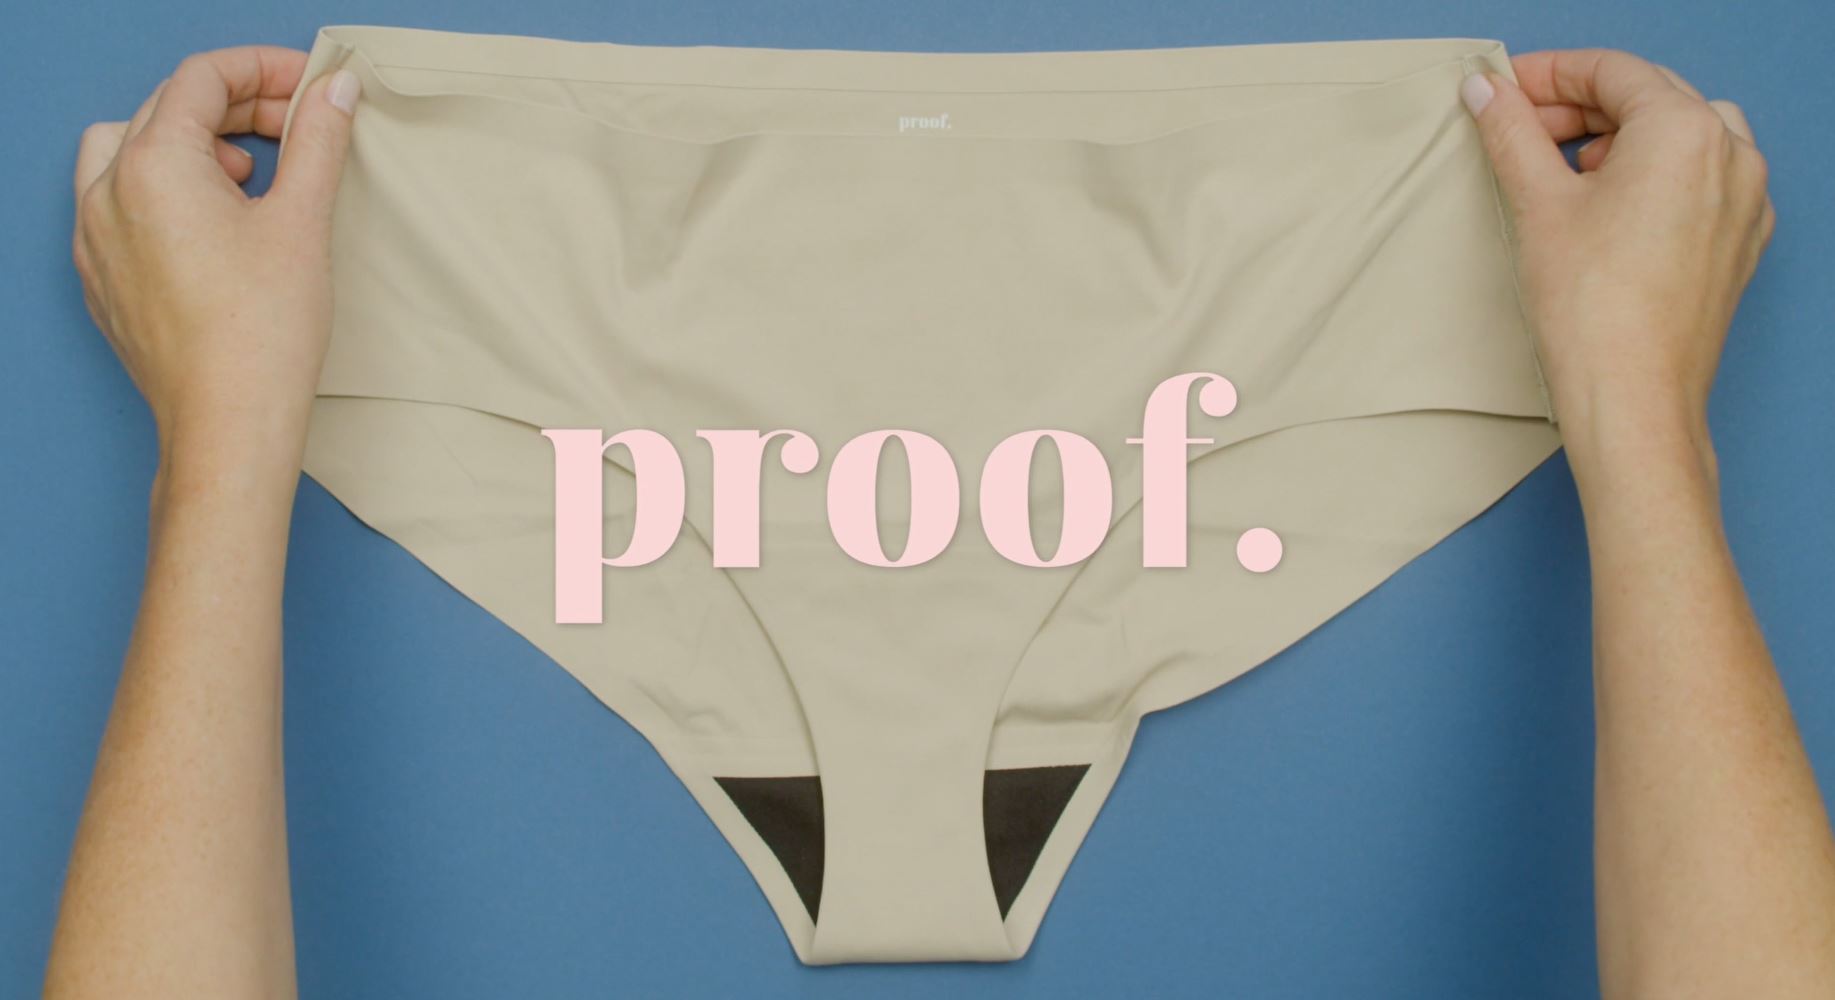 Proof Period & Leak Proof High-Waist Smoothing Brief & Reviews